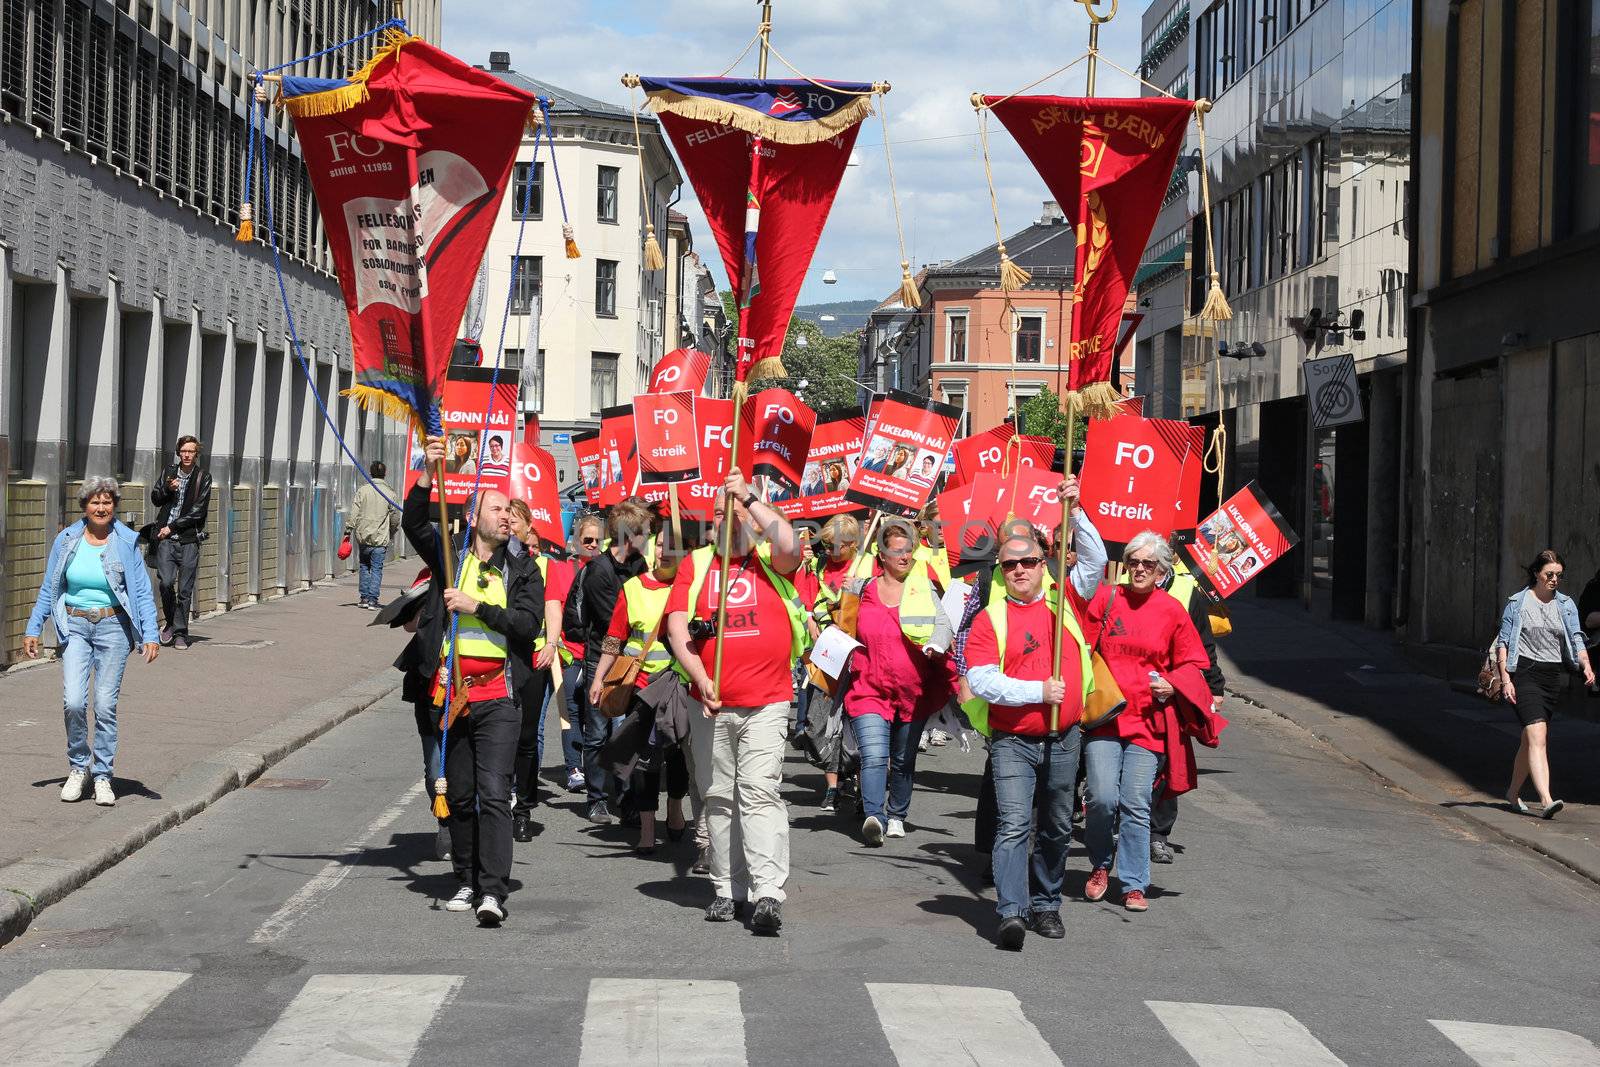 Public sector workers on strike marching through the streets of Oslo 30.05.2012.